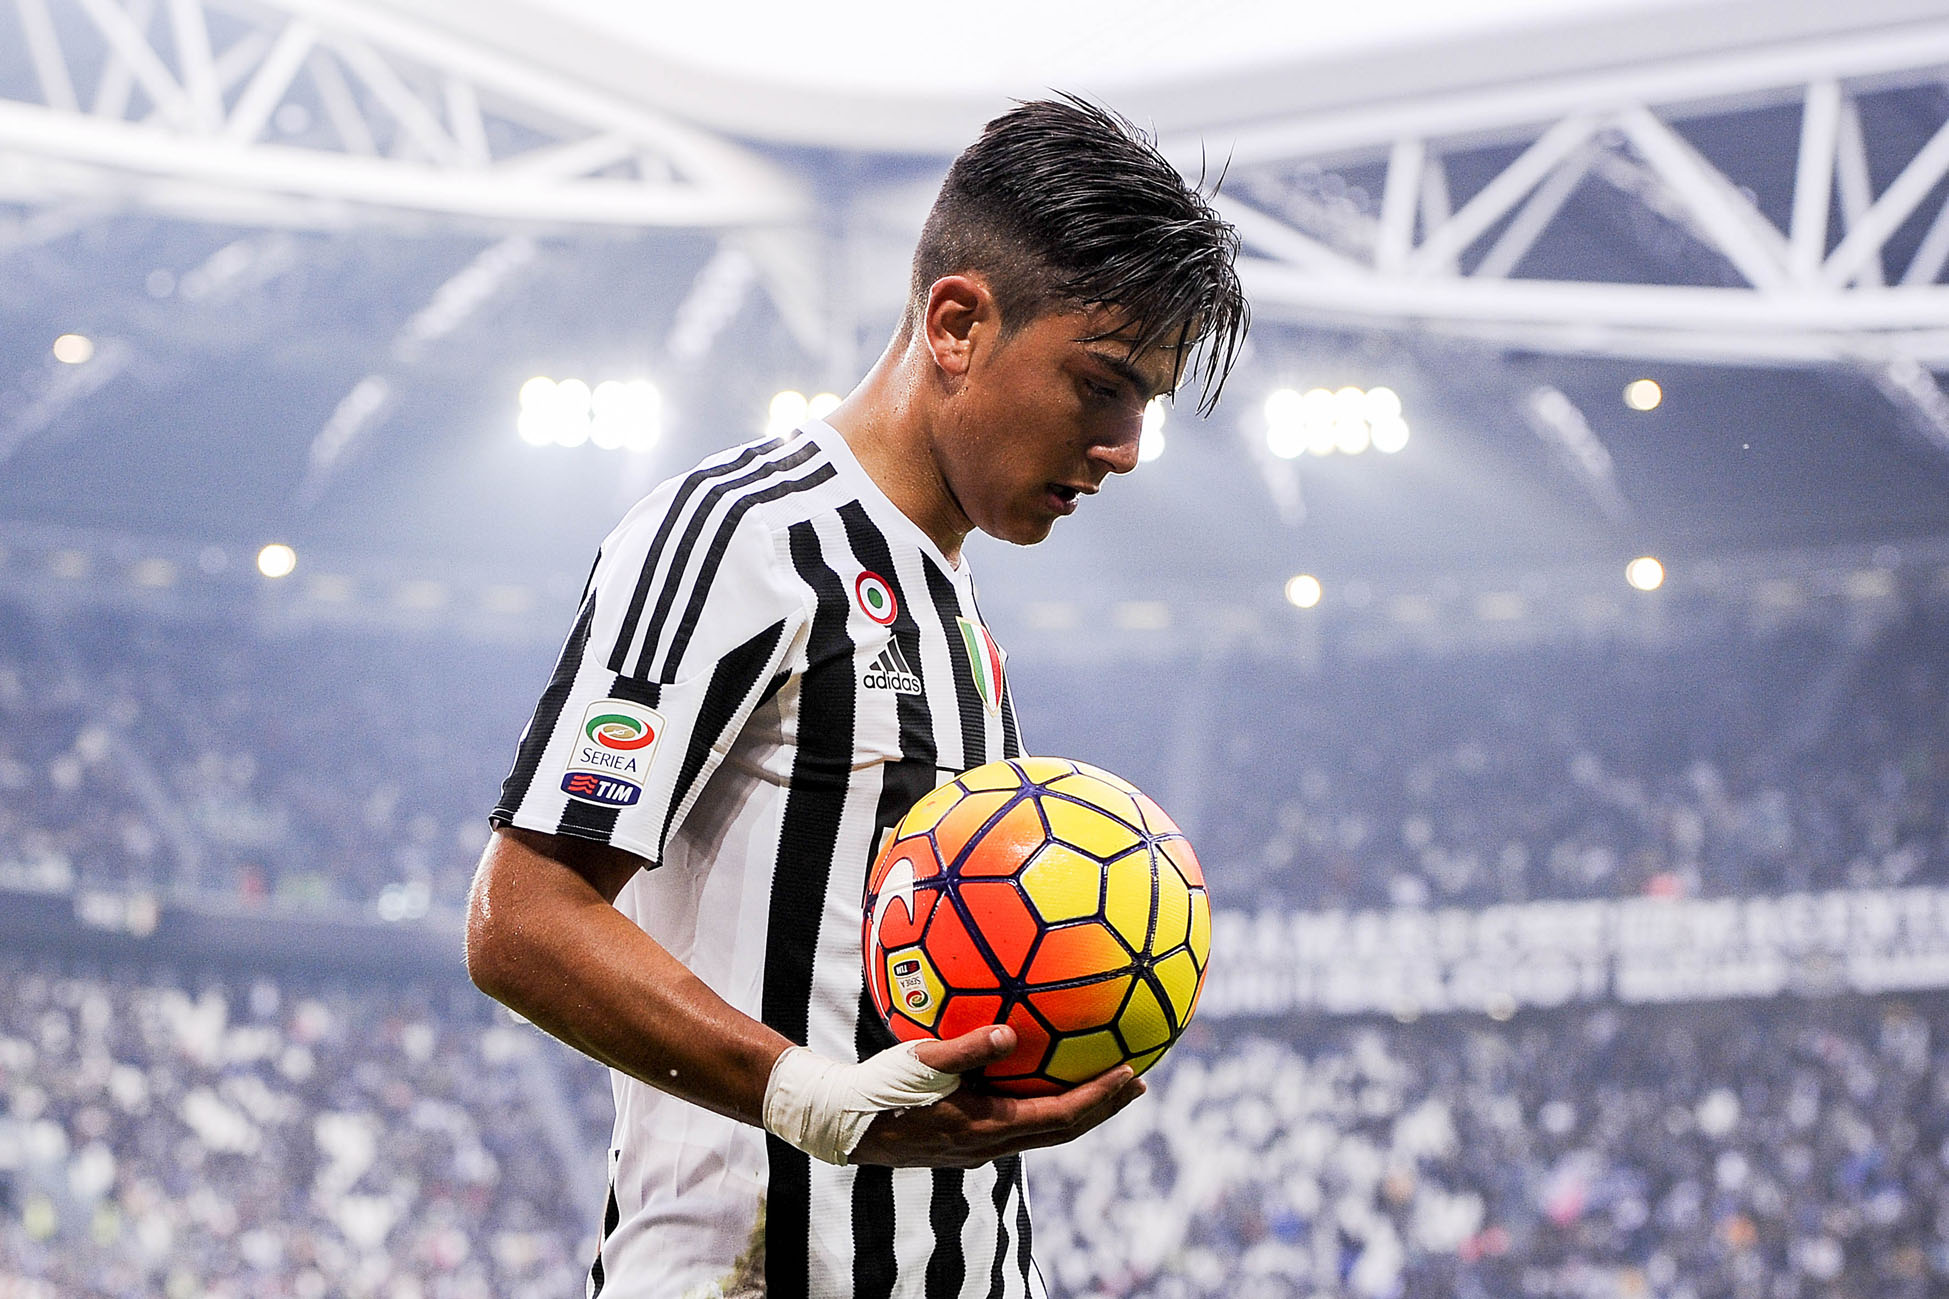 Paulo Dybala: "The Scudetto has to be ours" -Juvefc.com